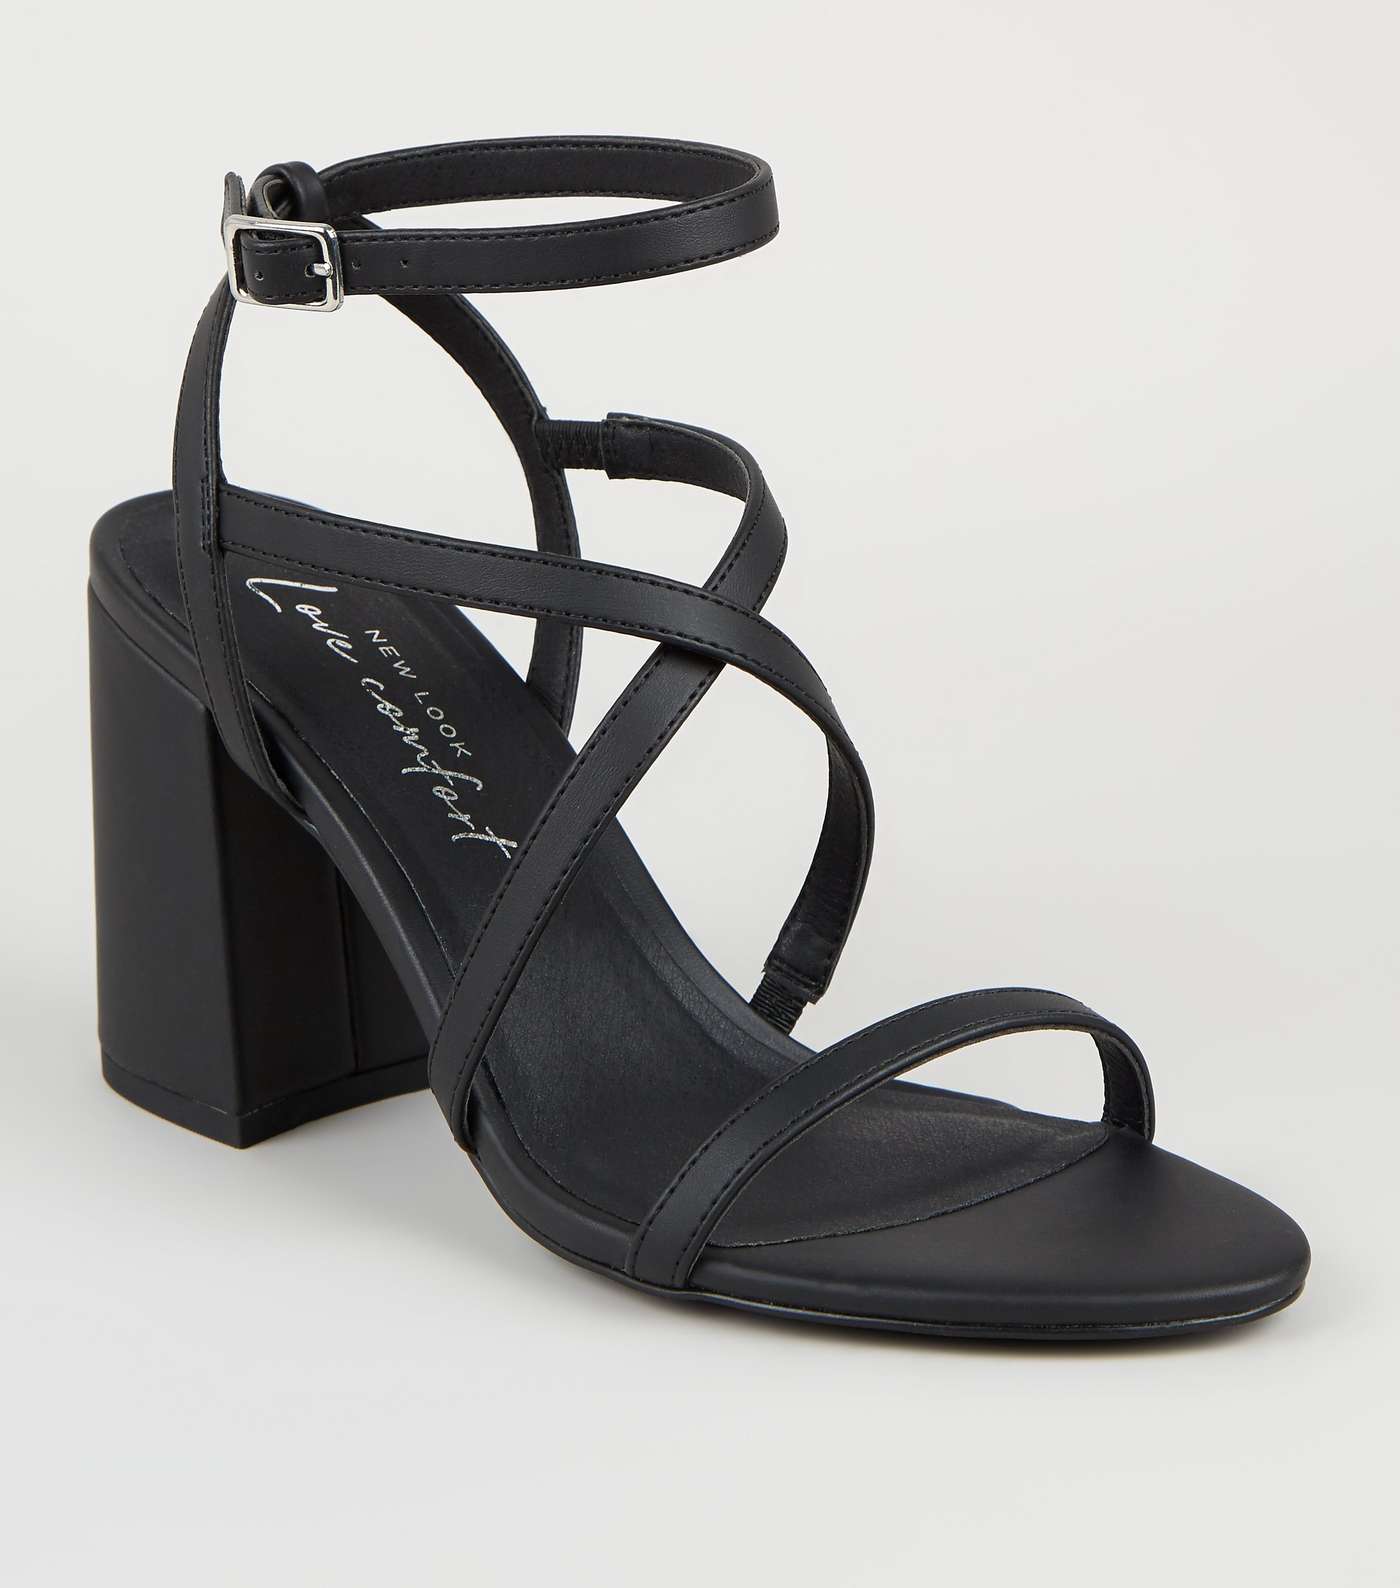 Black Leather-Look Strappy Flared Heel Sandals